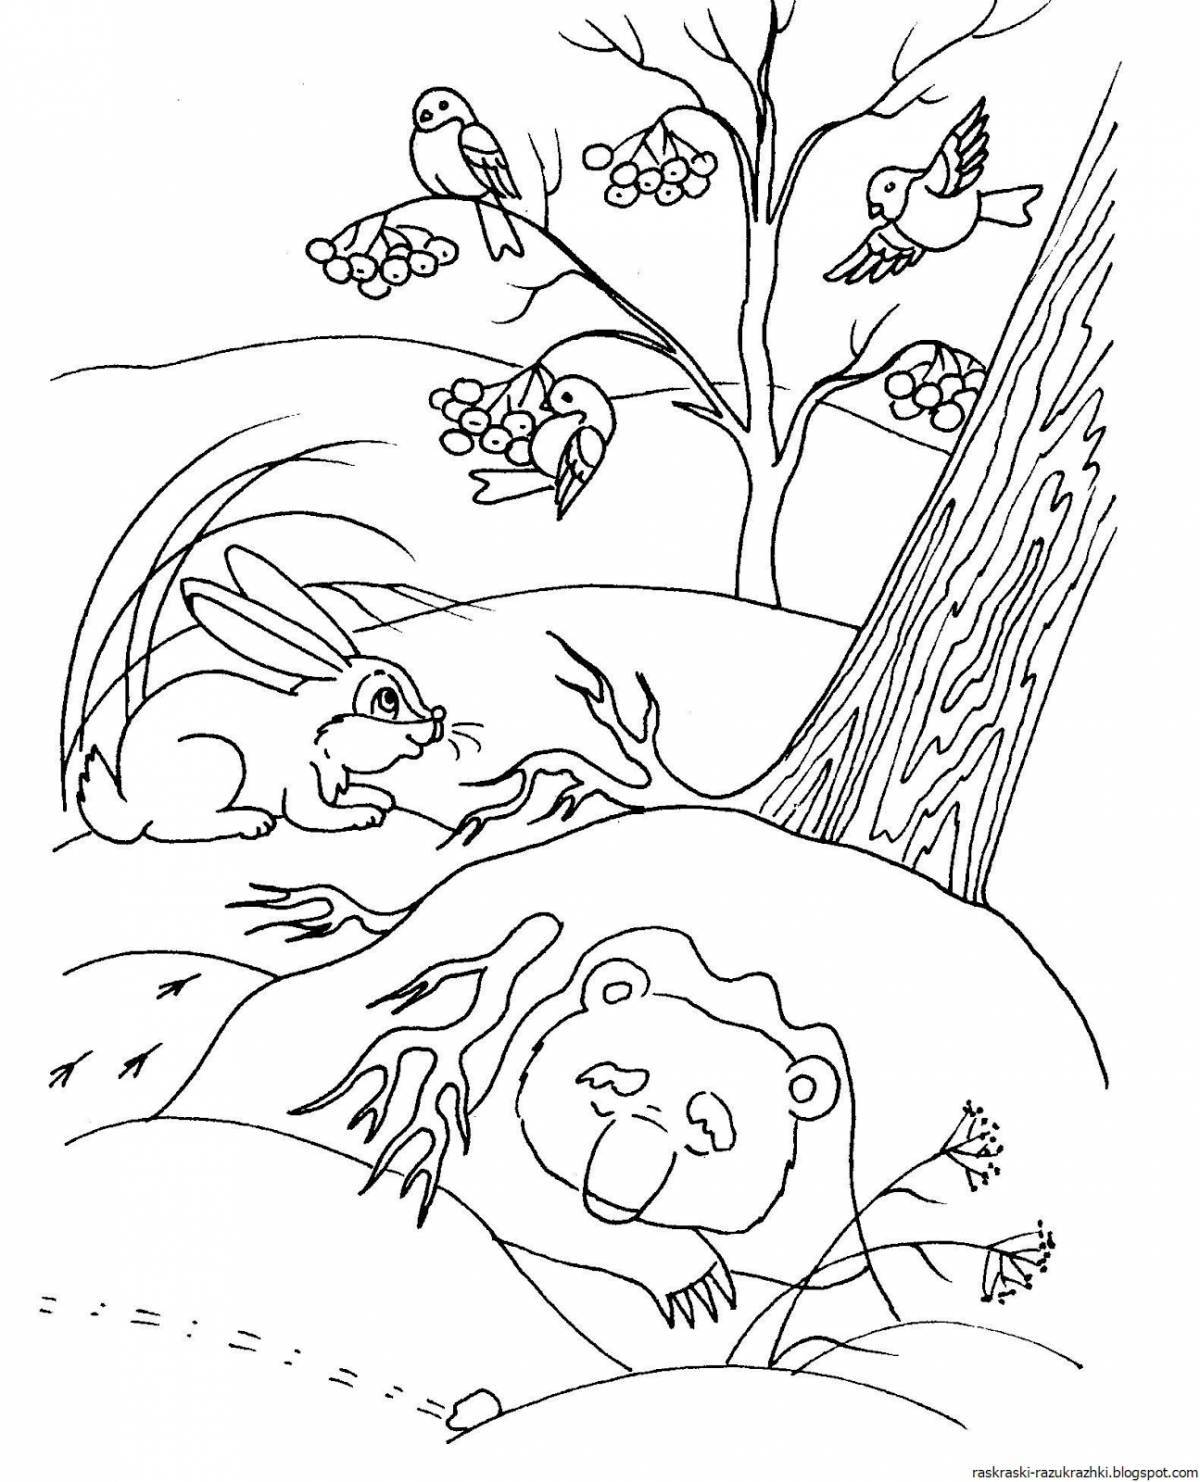 Blissful winter forest coloring pages for kids